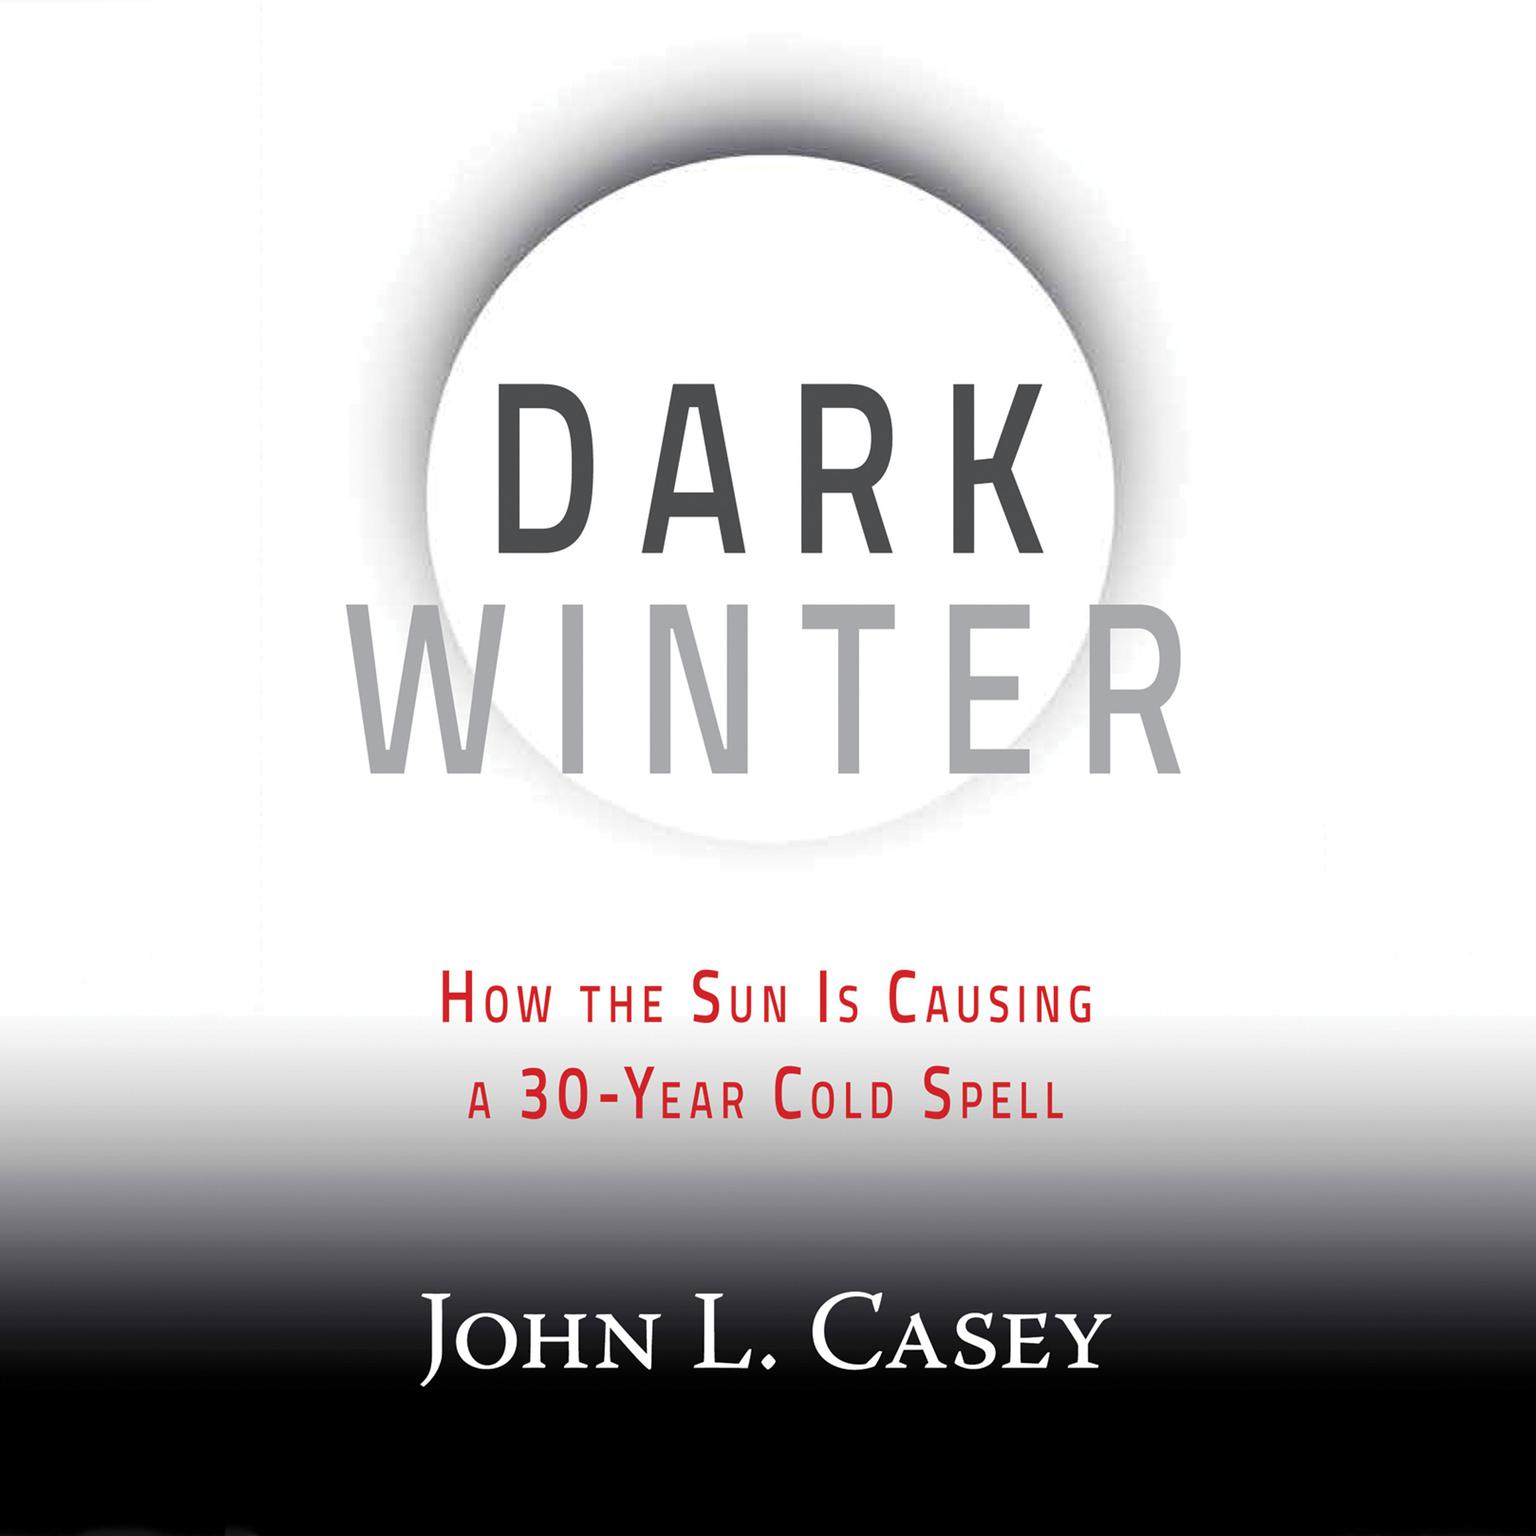 Dark Winter: How the Sun Is Causing a 30-Year Cold Spell Audiobook, by John L. Casey